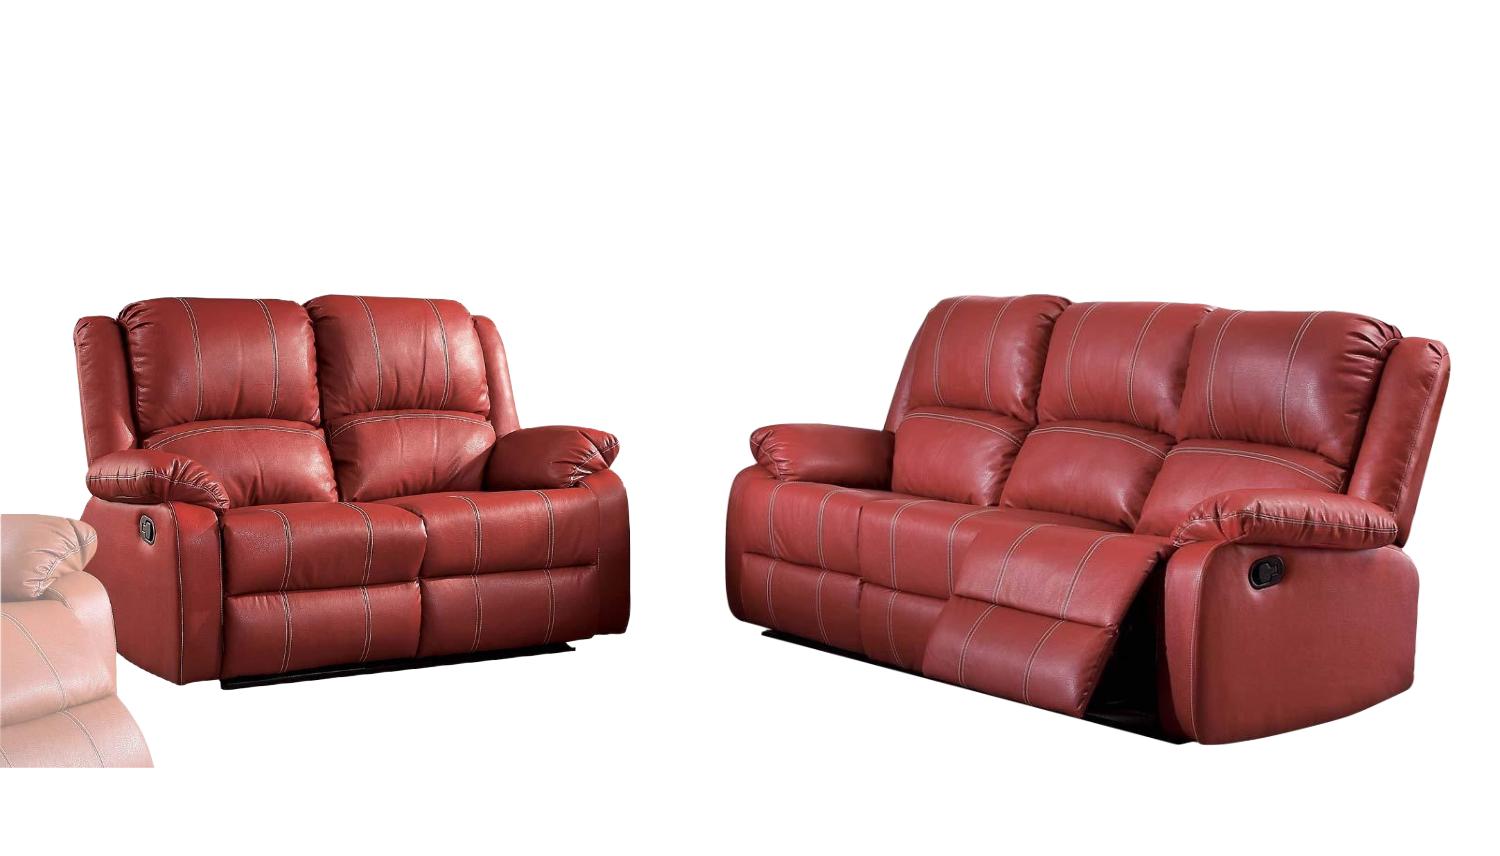 Modern Sofa and Loveseat Set Zuriel 52150-2pcs in Red Faux Leather